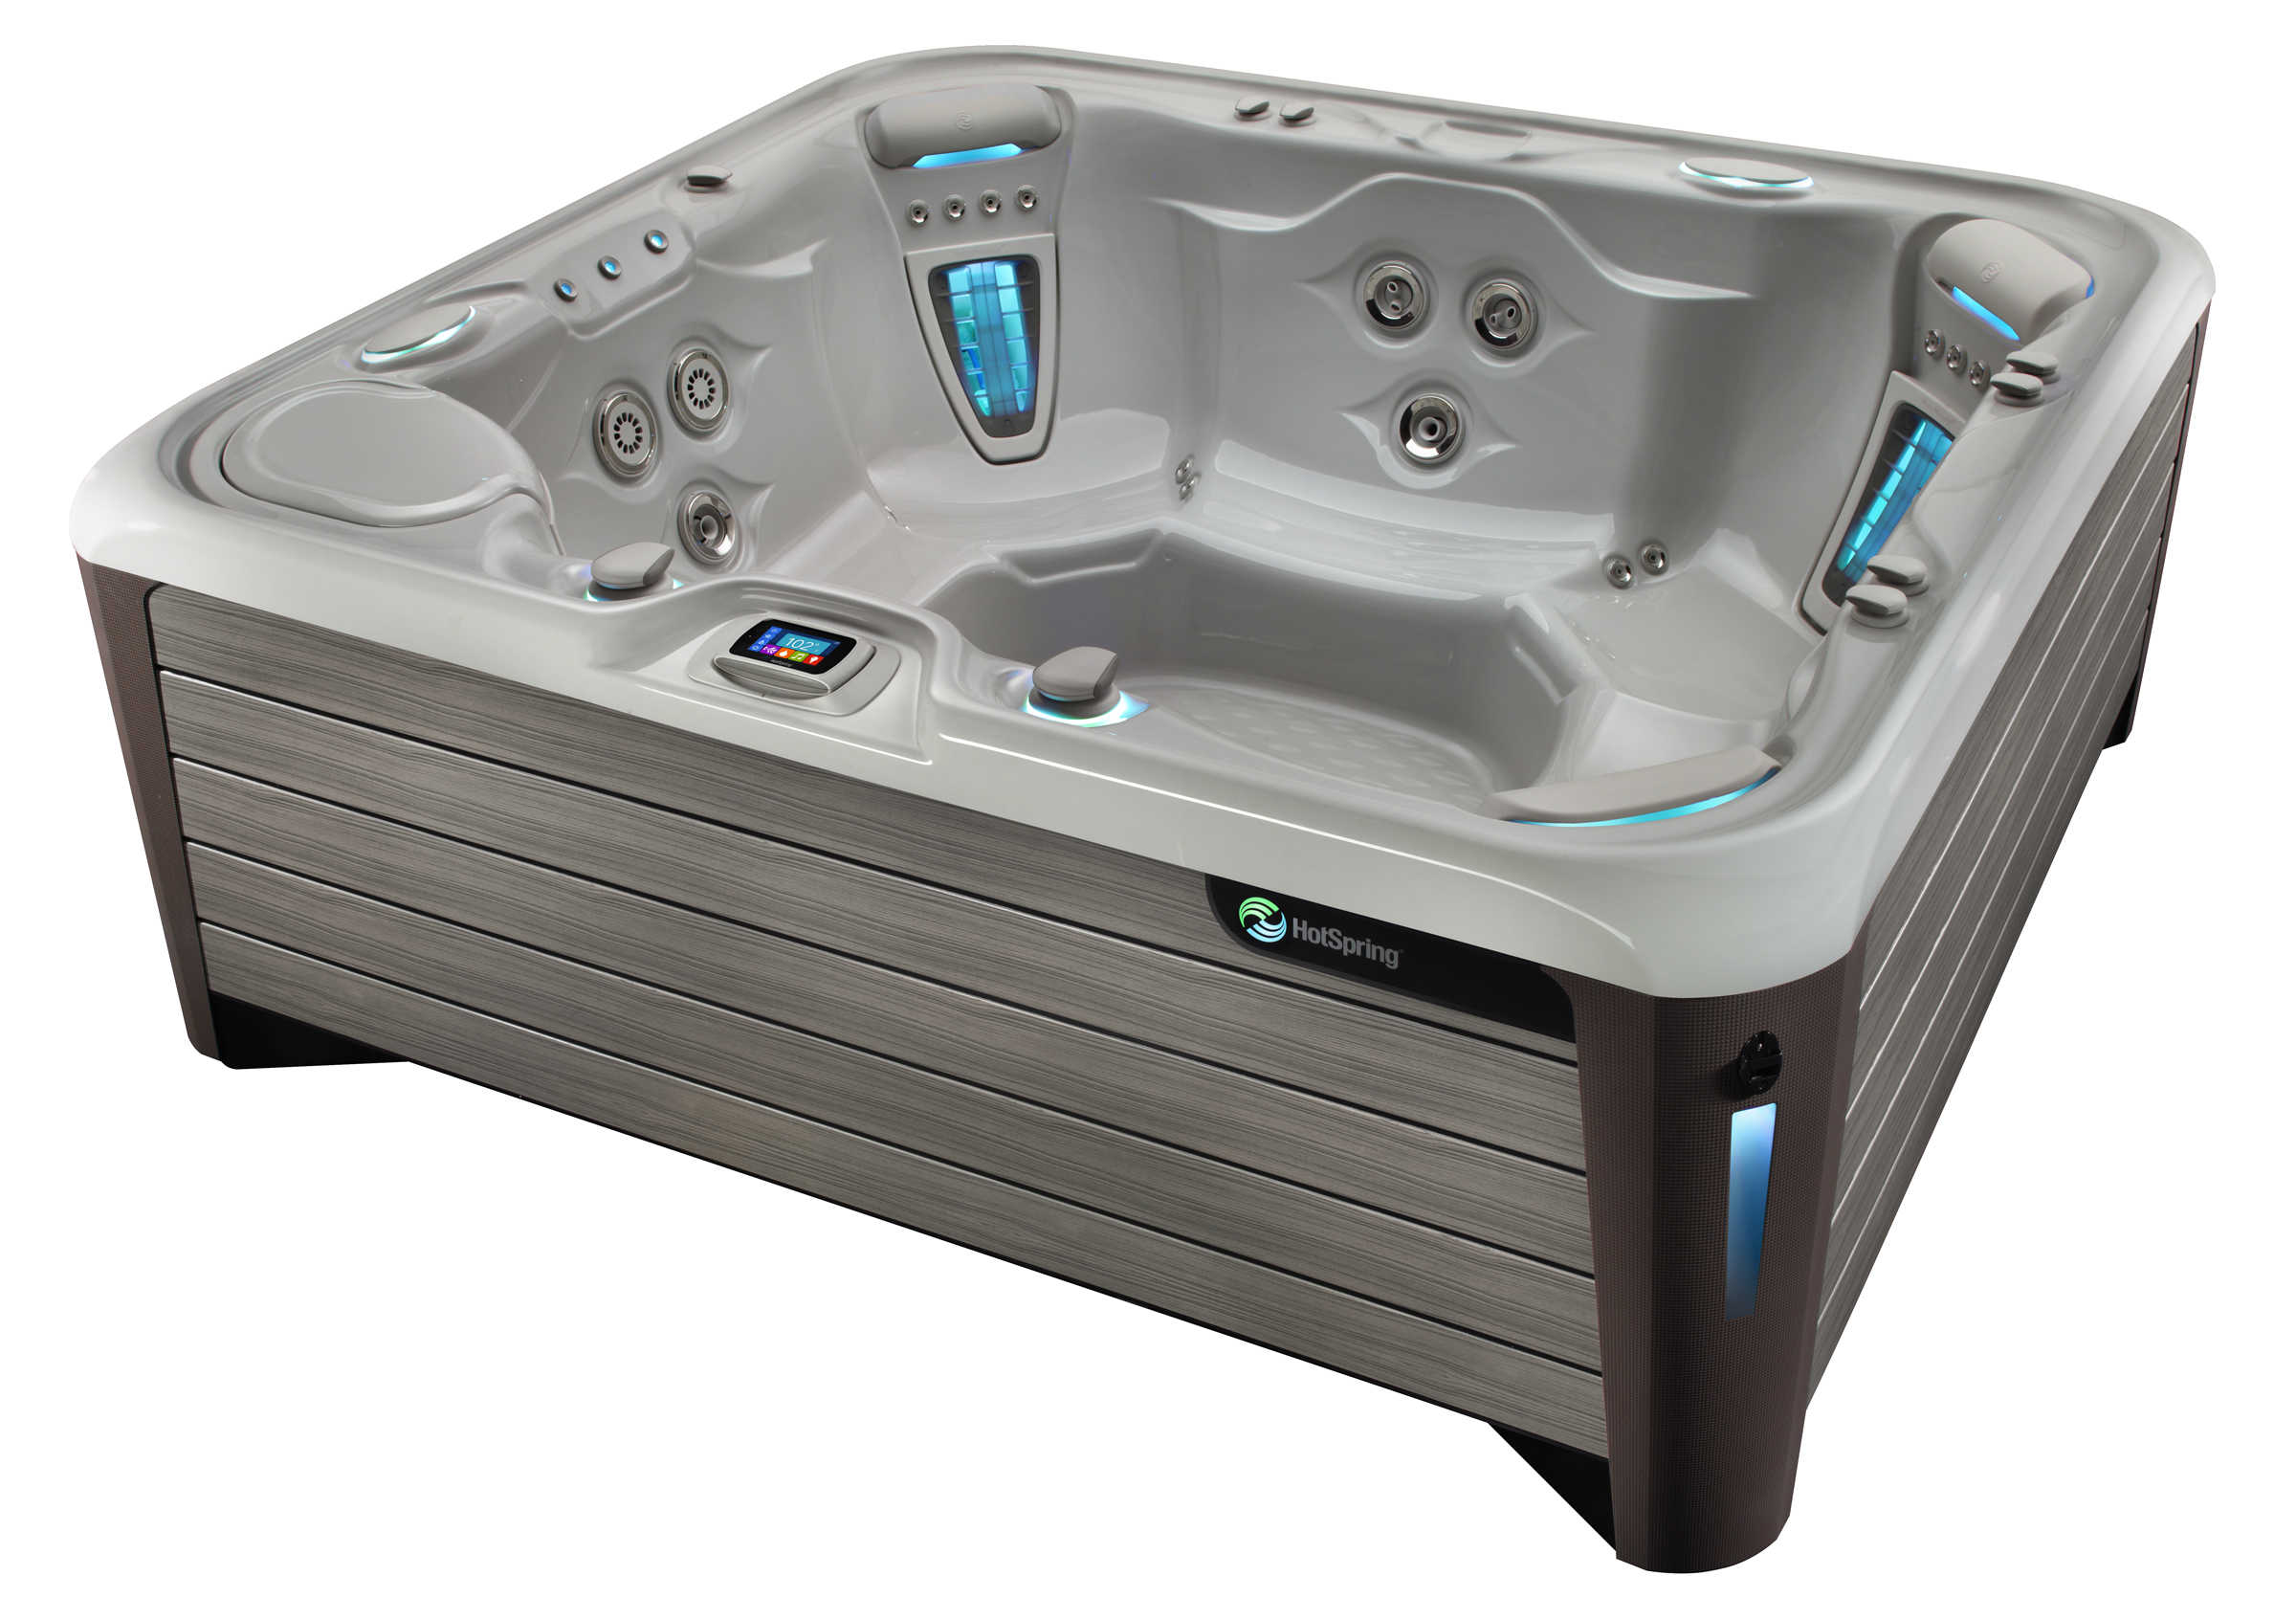 Grandee Nxt Hot Tub Specs Reviews And Pricing Call 903 561 7565